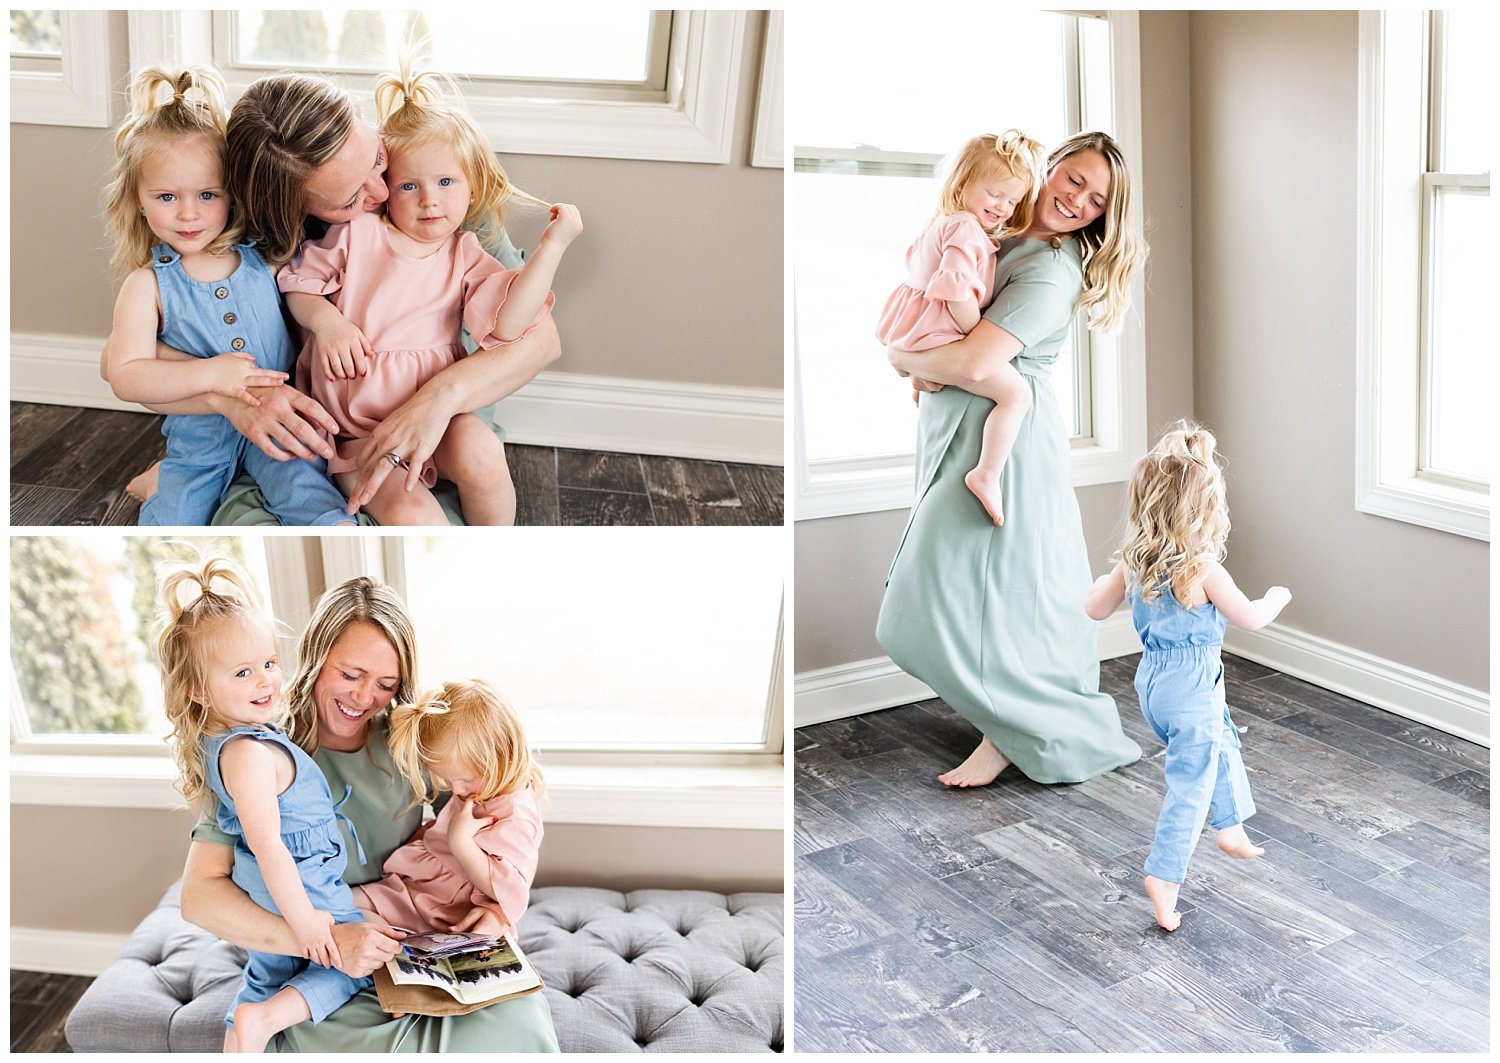 Mother and daughter sesion, wardobe selected by using Style and Select.